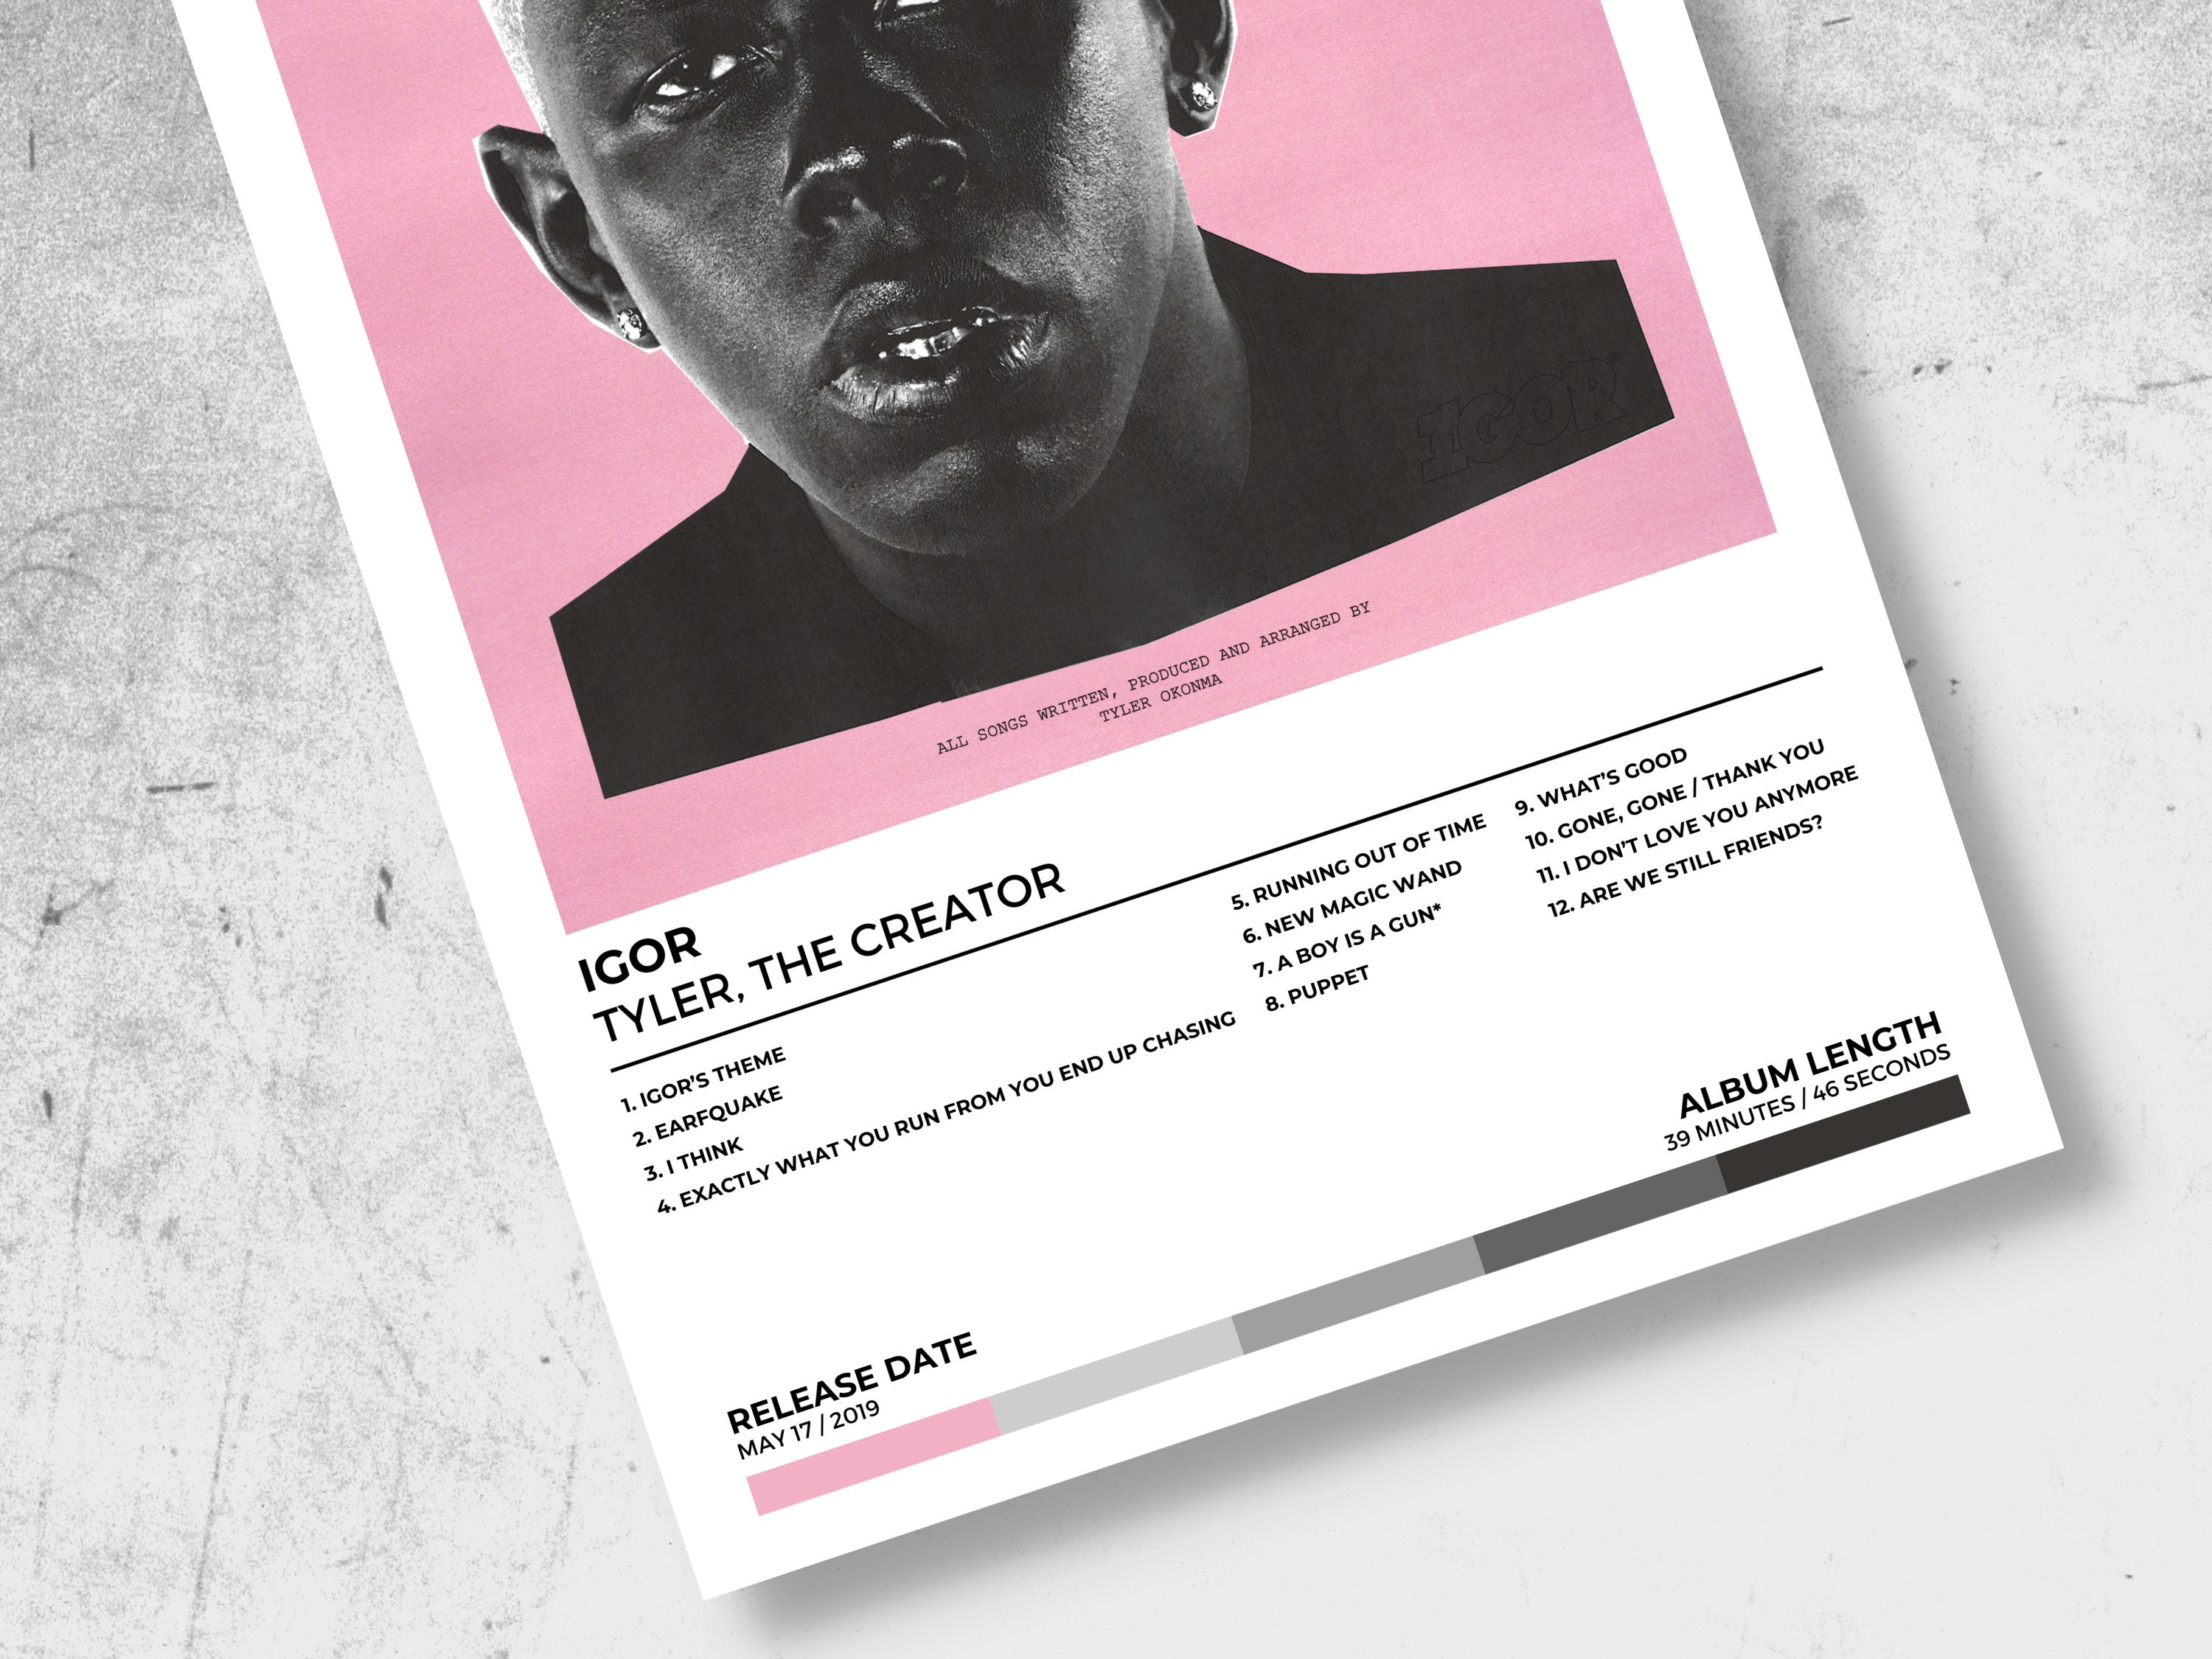 YNREMM Rapper Tyler The Creator IGOR Album Cover Signed Posters for room  aesthetic Music Canvas Poster 12x18 inches unframed